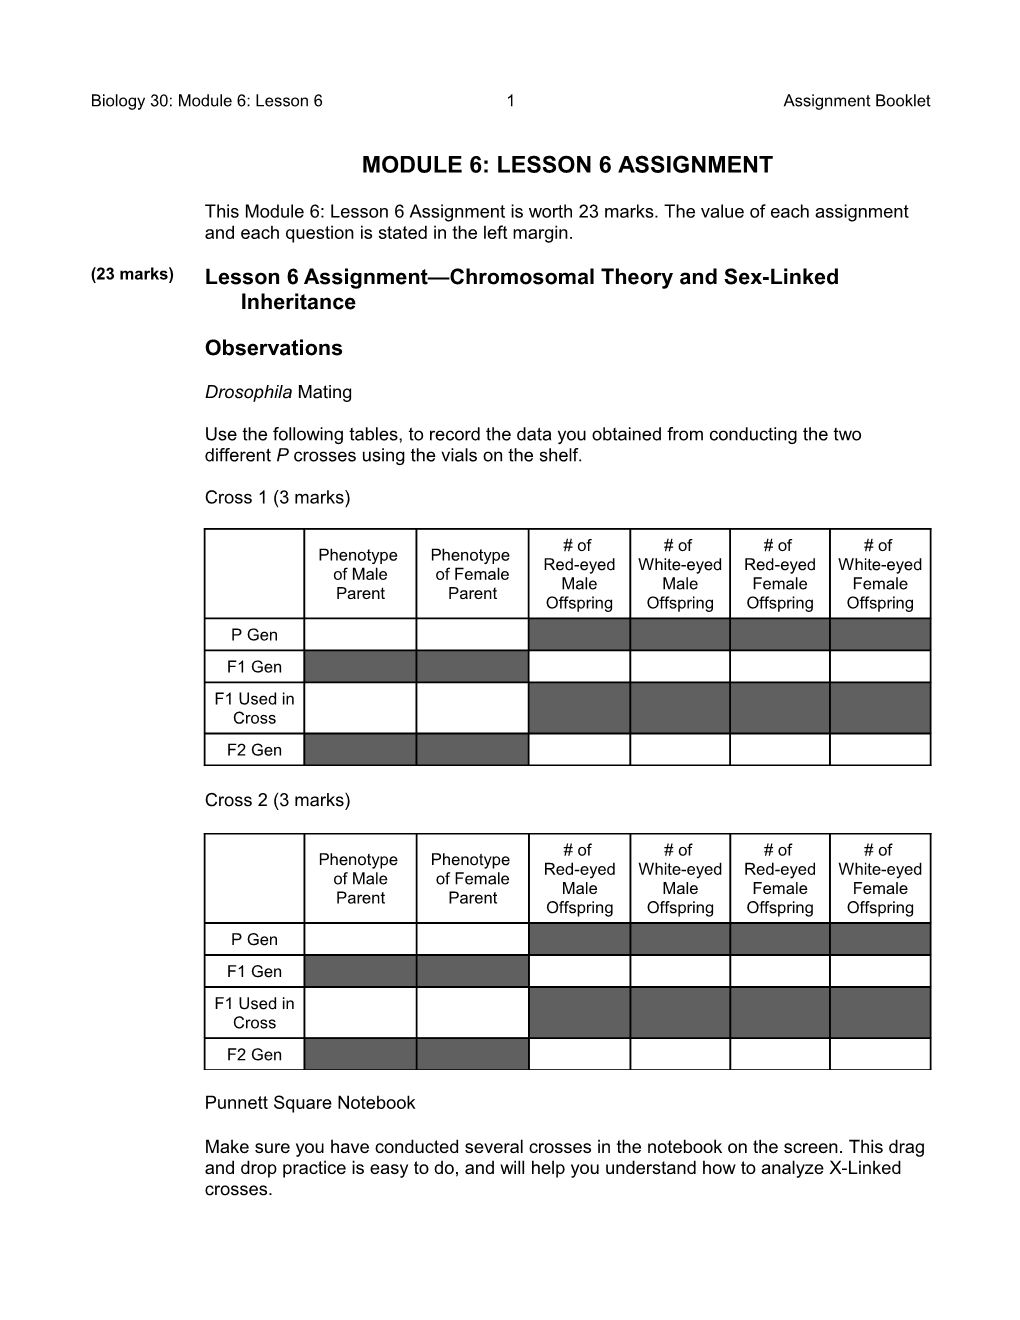 Lesson 6 Assignment Chromosomal Theory and Sex-Linked Inheritance